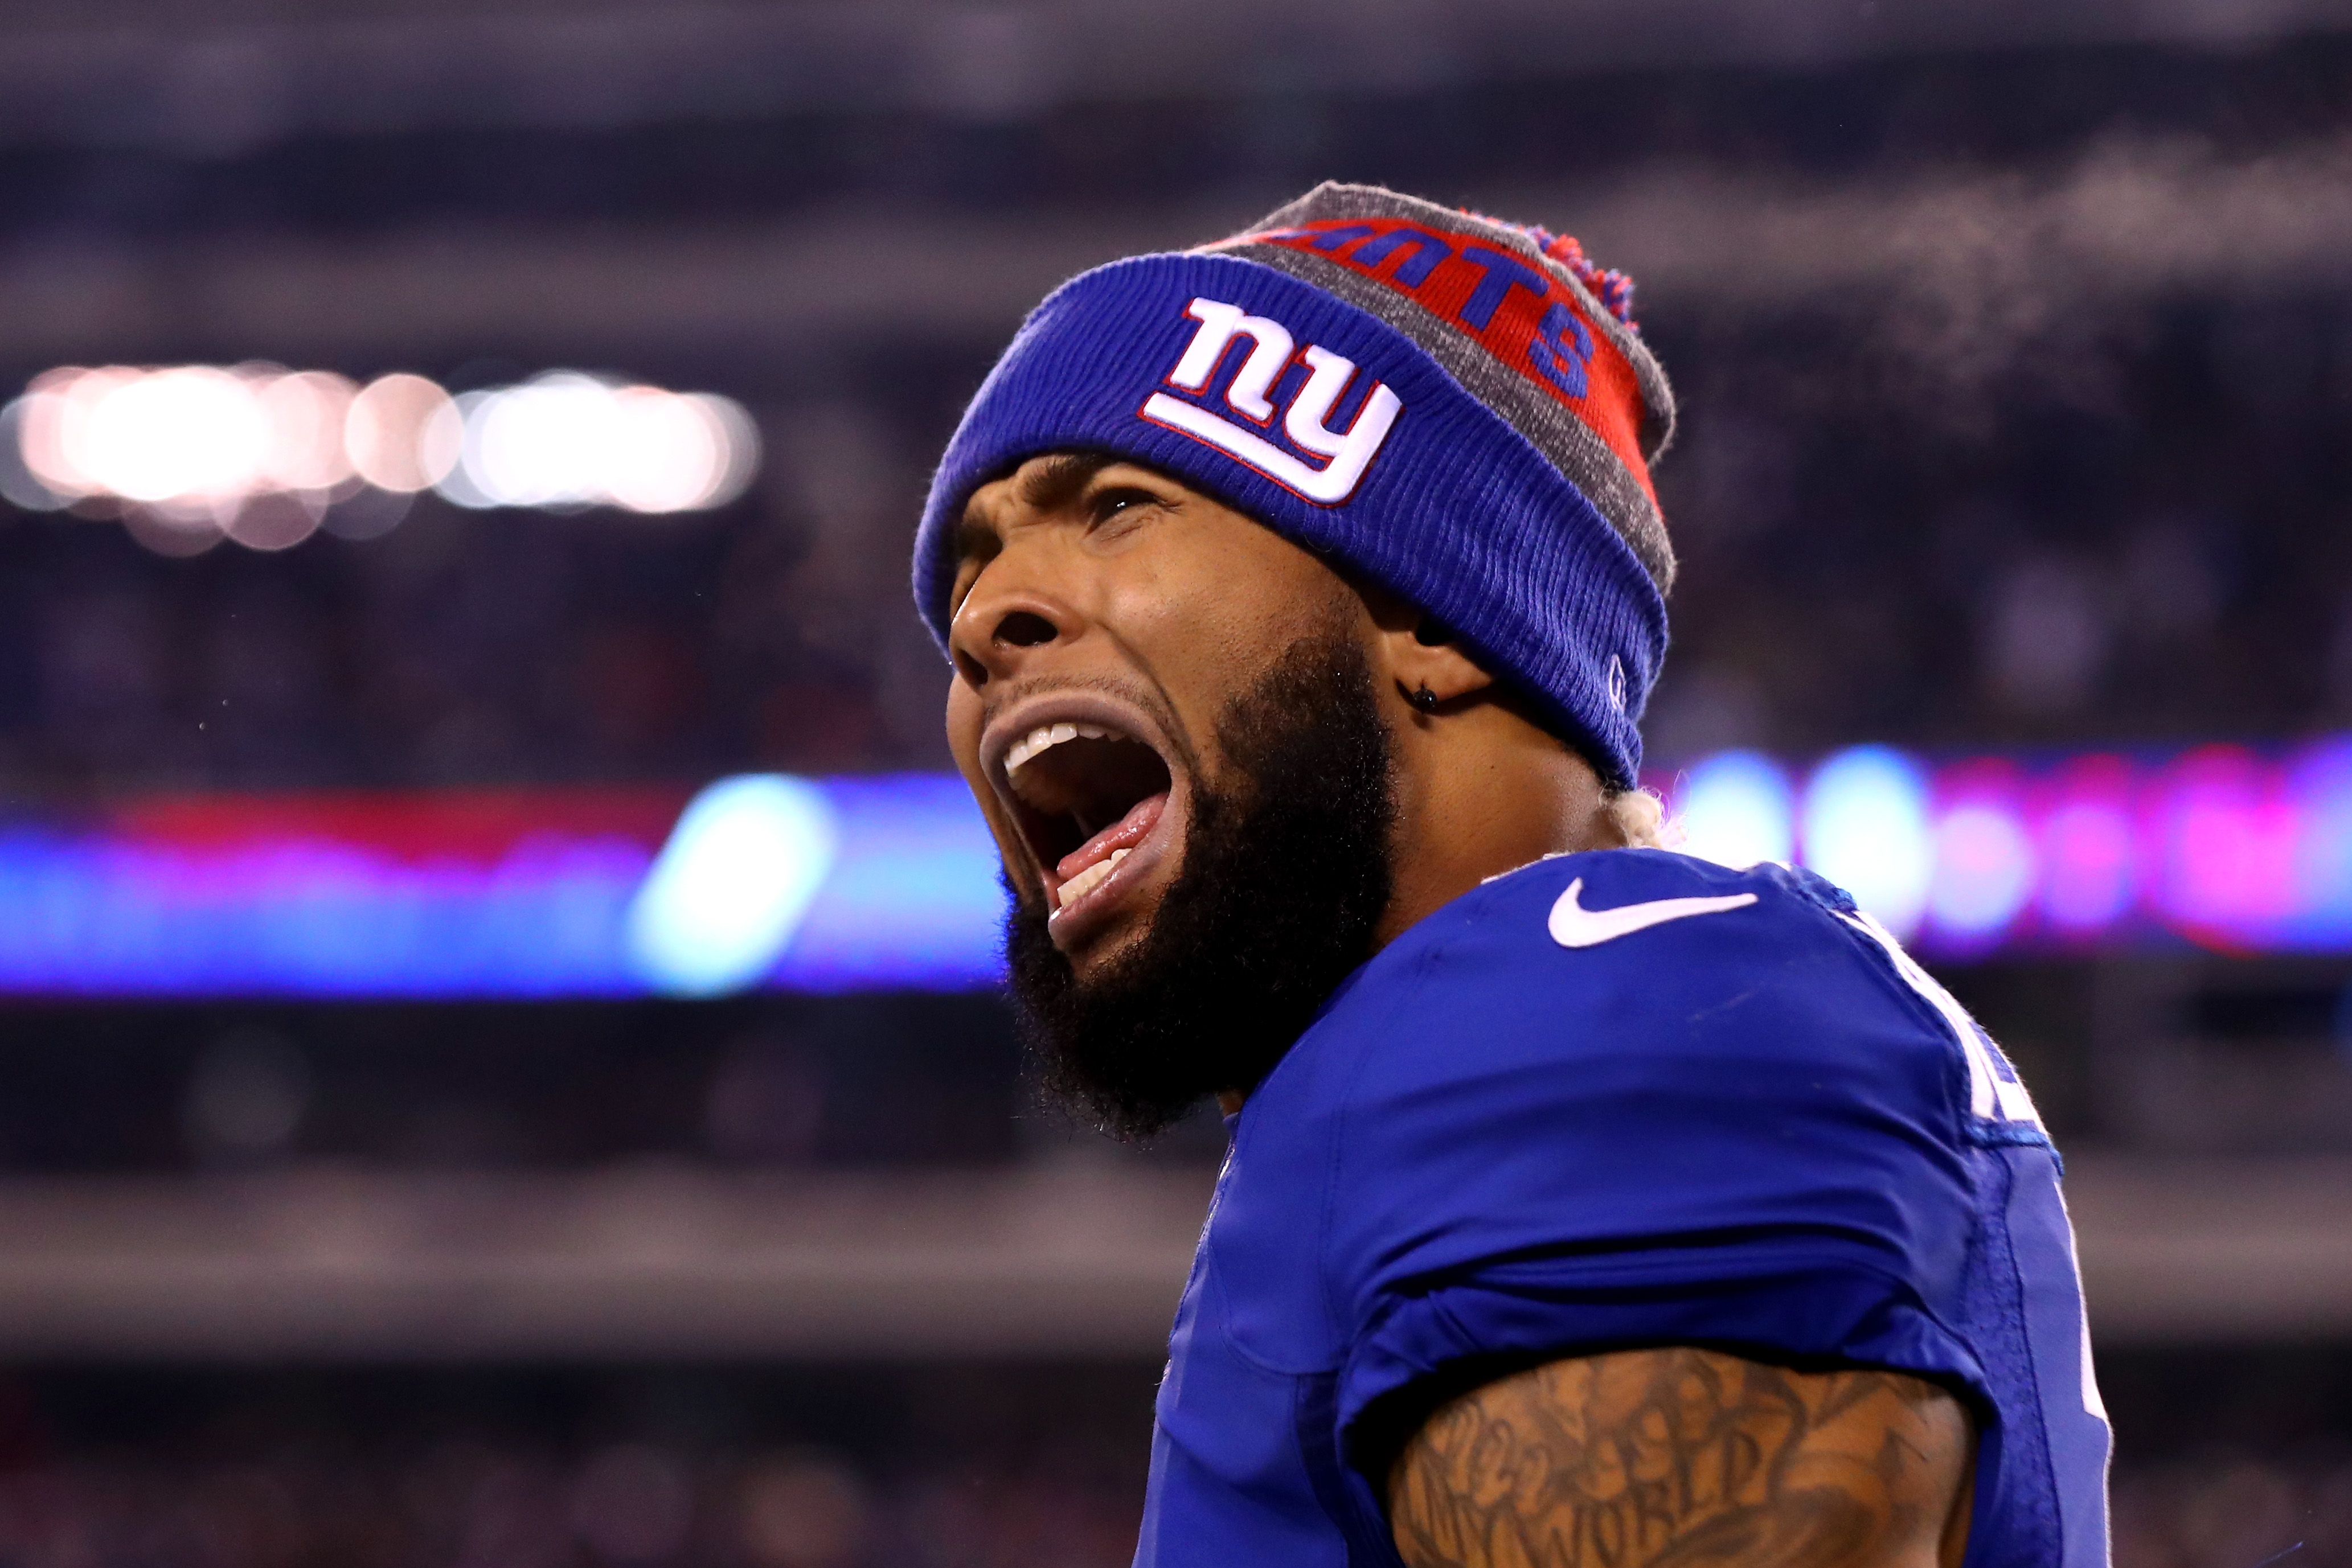 new york giants playoffs, giants playoff chances, giants playoffs, NFL, Playoff, Picture, AFC, NFC, Seeding, Updated, playoff chances, postseason, giants playoff schedule, giants first round game, giants wild card game,